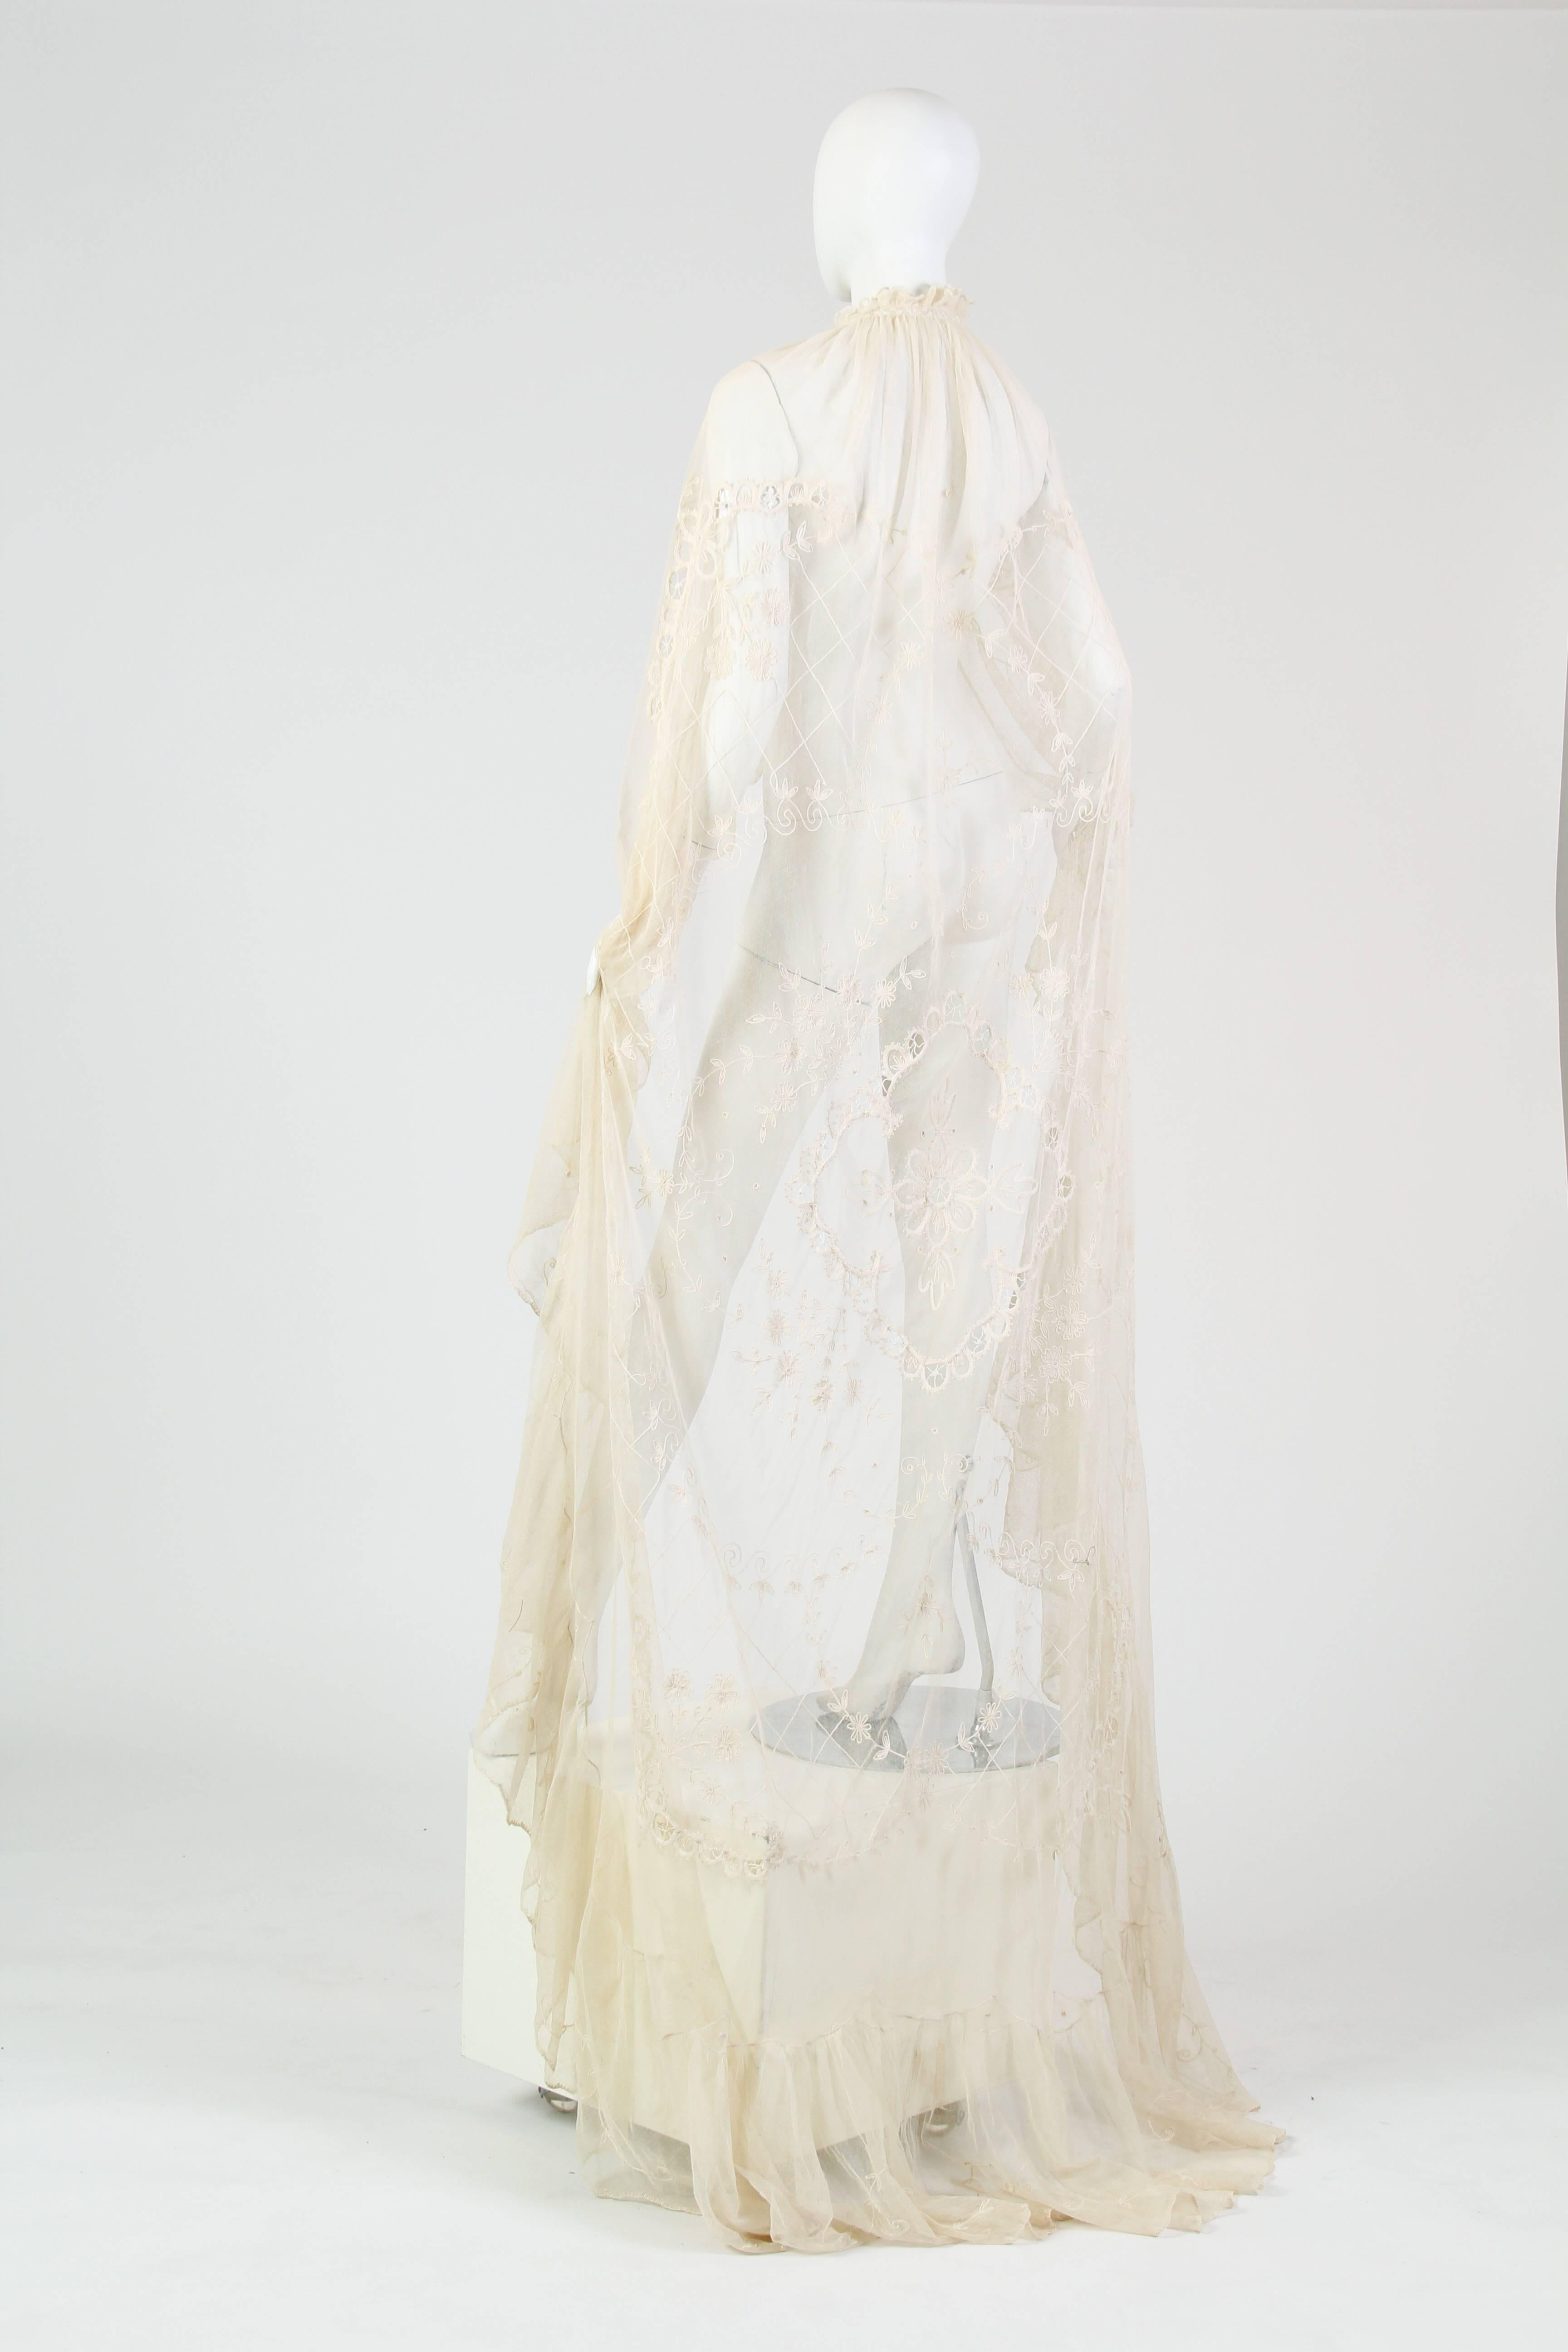 Women's Bridal Cape with Train made from Edwardian Lace